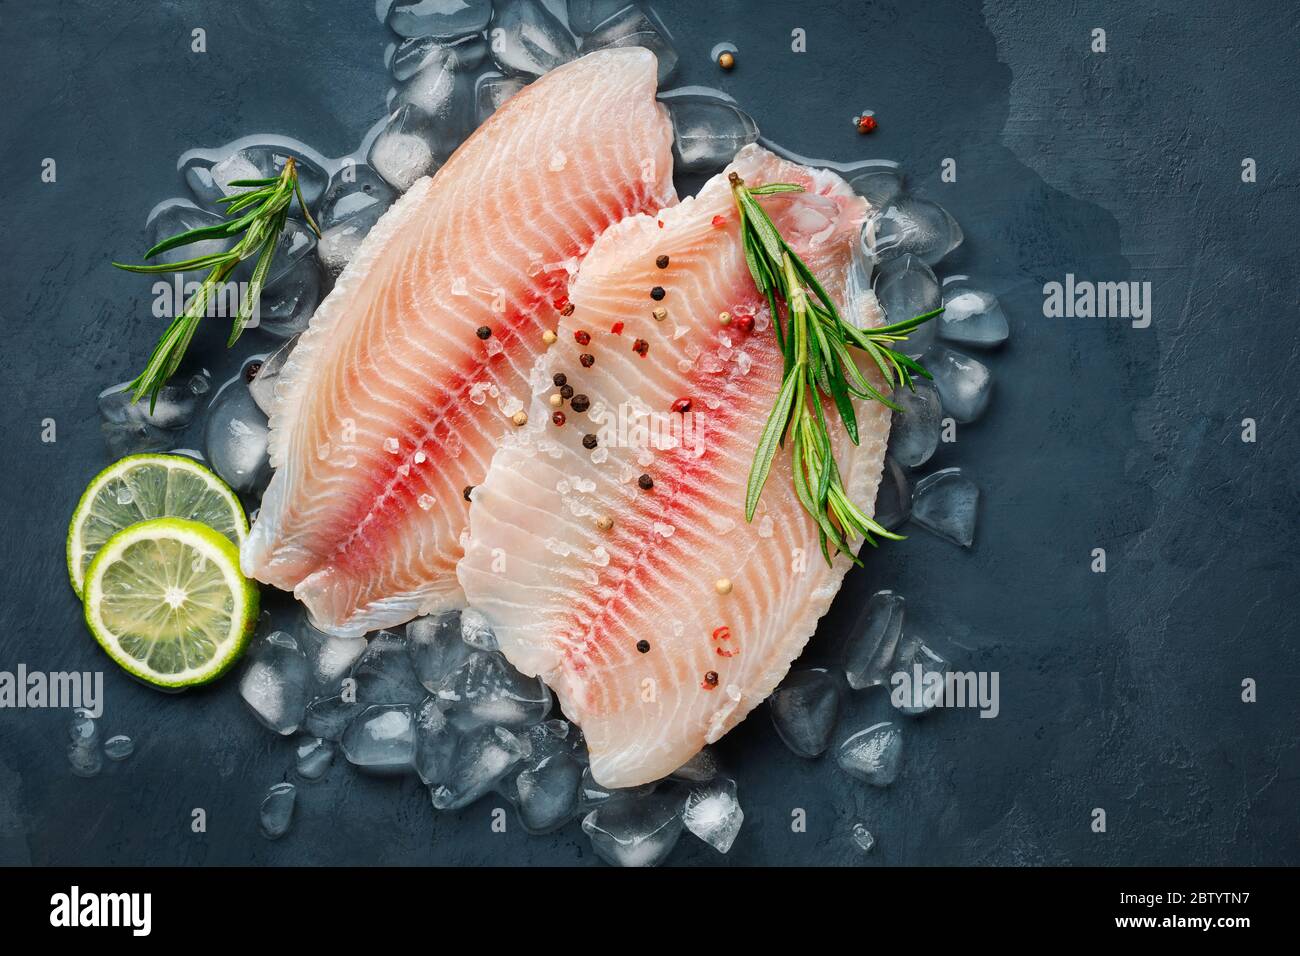 Glass baking tray with raw sea bass fish and ingredients in oven, closeup  Stock Photo - Alamy